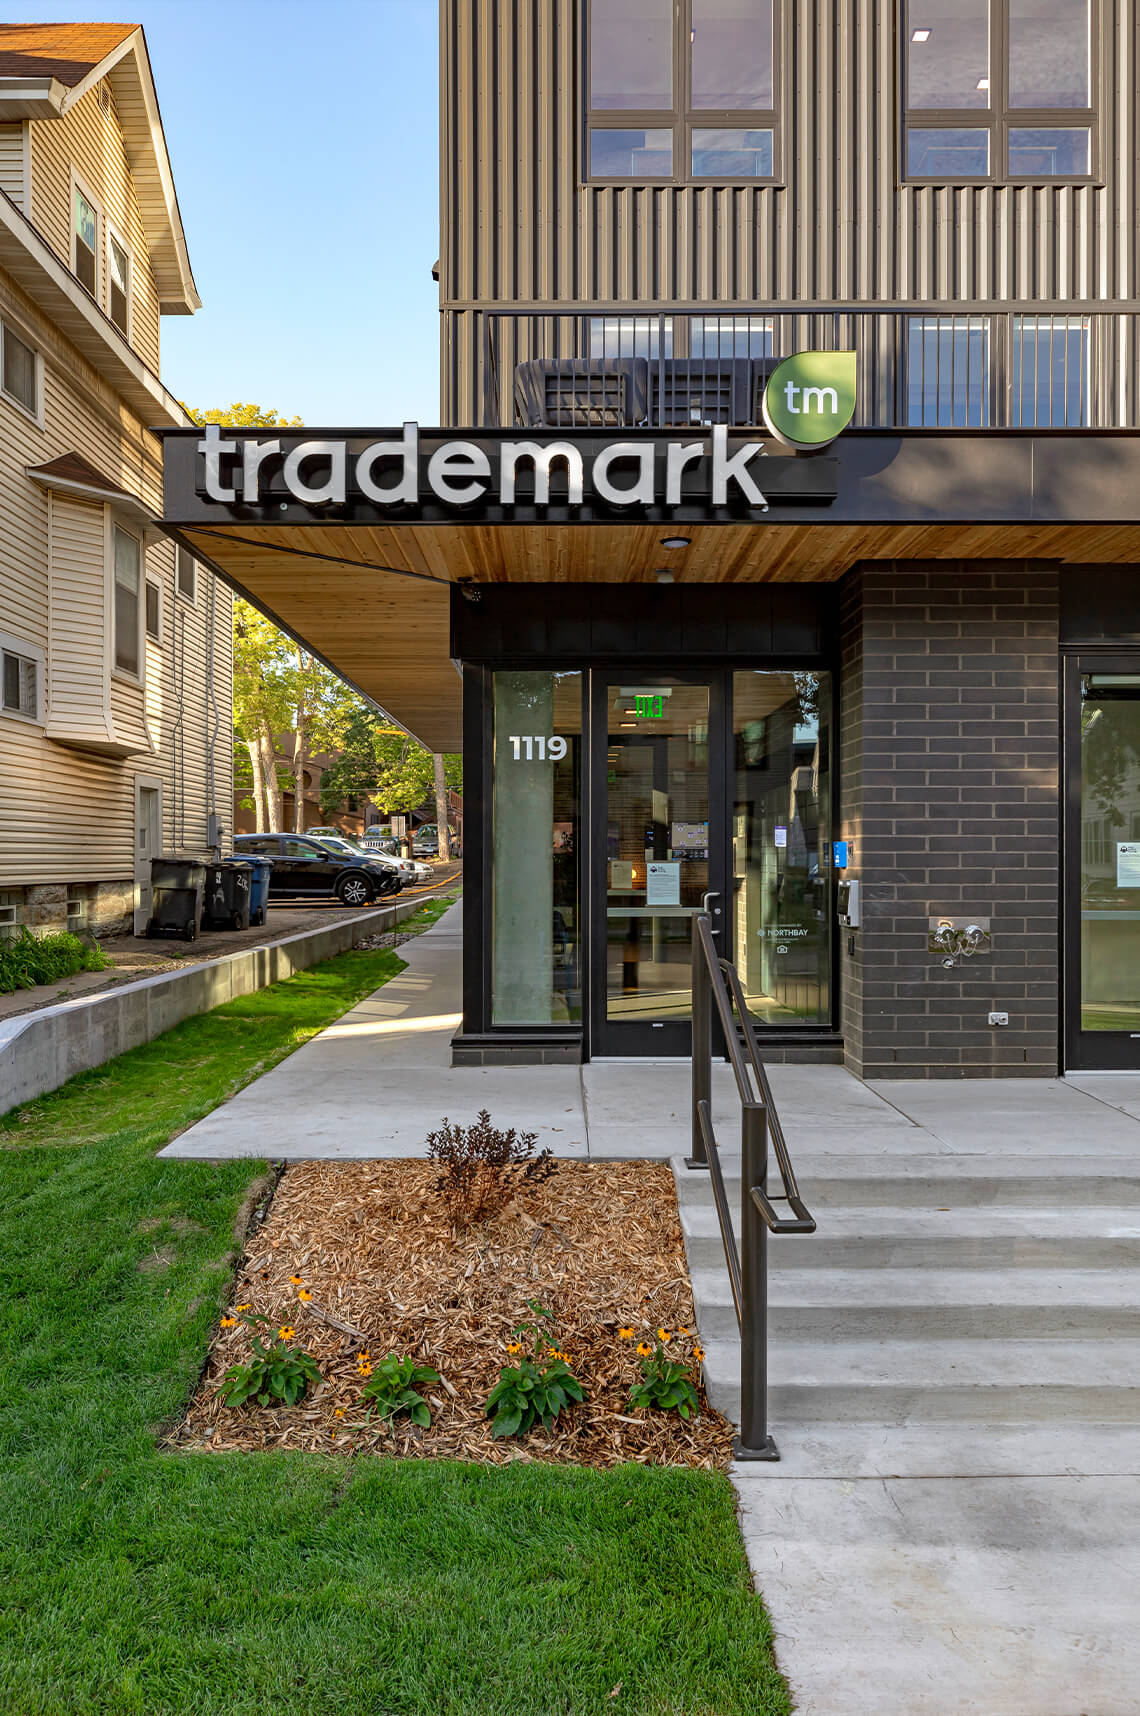 Modern apartment building entrance with 'trademark' sign.